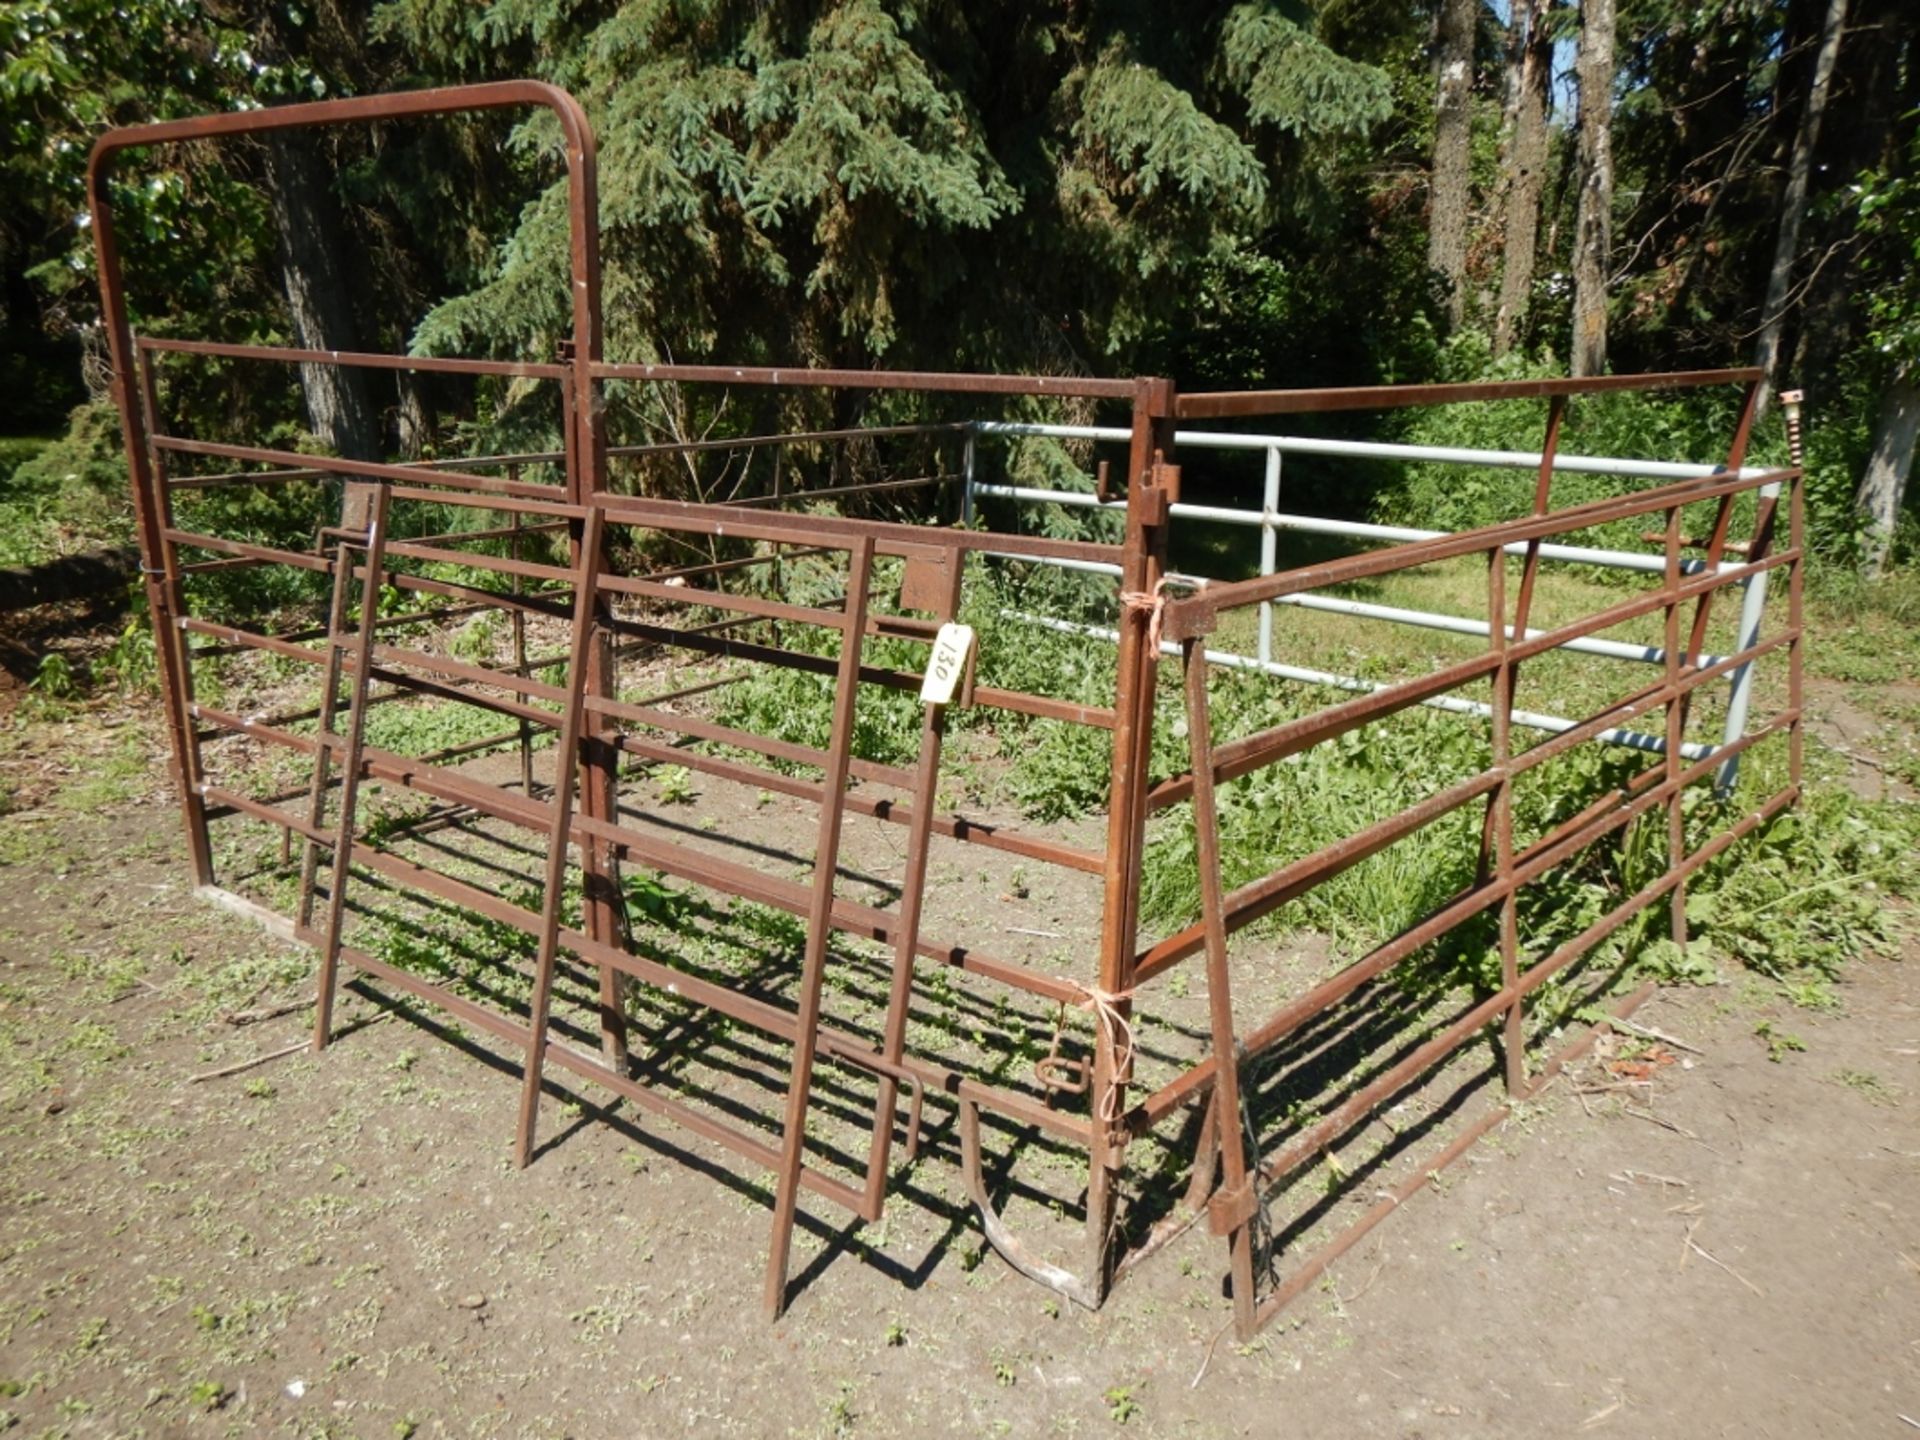 L/O ASSORTED STOCK PANELS INCLUDING FRAME GATE - (GRAY LIVESTOCK GATE NOT INCLUDED)